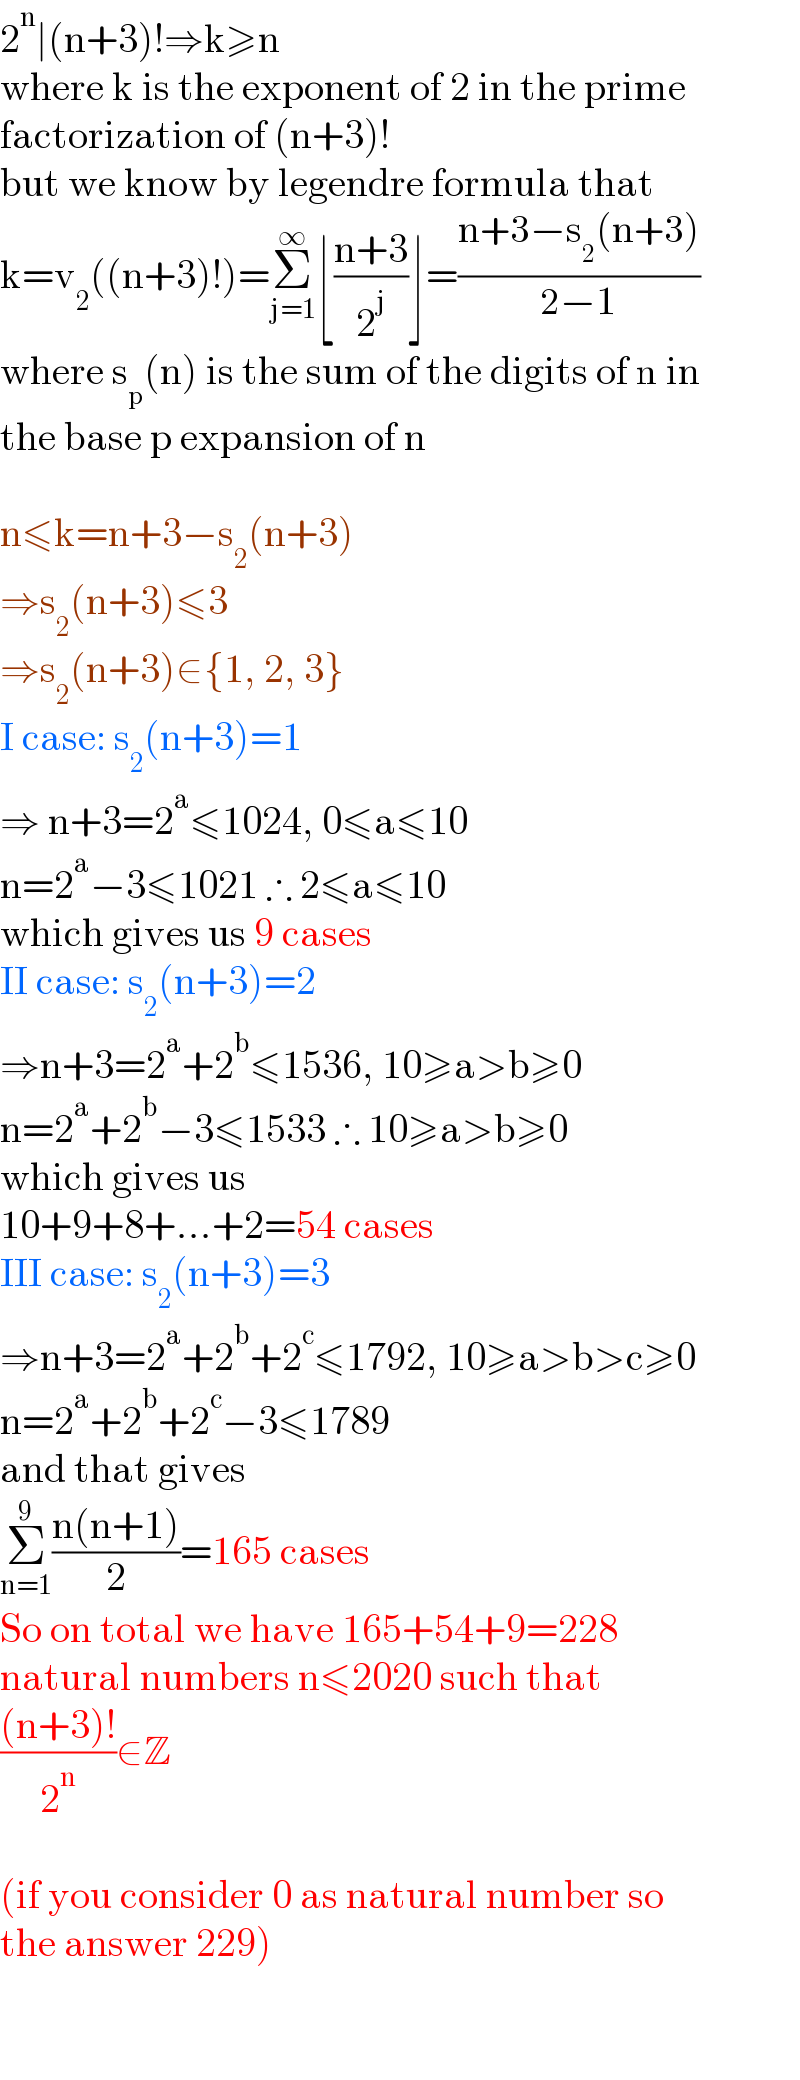 2^n ∣(n+3)!⇒k≥n  where k is the exponent of 2 in the prime   factorization of (n+3)!  but we know by legendre formula that  k=v_2 ((n+3)!)=Σ_(j=1) ^∞ ⌊((n+3)/2^j )⌋=((n+3−s_2 (n+3))/(2−1))  where s_p (n) is the sum of the digits of n in  the base p expansion of n    n≤k=n+3−s_2 (n+3)  ⇒s_2 (n+3)≤3  ⇒s_2 (n+3)∈{1, 2, 3}  I case: s_2 (n+3)=1  ⇒ n+3=2^a ≤1024, 0≤a≤10  n=2^a −3≤1021 ∴ 2≤a≤10  which gives us 9 cases  II case: s_2 (n+3)=2  ⇒n+3=2^a +2^b ≤1536, 10≥a>b≥0  n=2^a +2^b −3≤1533 ∴ 10≥a>b≥0  which gives us   10+9+8+...+2=54 cases  III case: s_2 (n+3)=3  ⇒n+3=2^a +2^b +2^c ≤1792, 10≥a>b>c≥0  n=2^a +2^b +2^c −3≤1789  and that gives  Σ_(n=1) ^9 ((n(n+1))/2)=165 cases  So on total we have 165+54+9=228   natural numbers n≤2020 such that  (((n+3)!)/2^n )∈Z    (if you consider 0 as natural number so  the answer 229)    